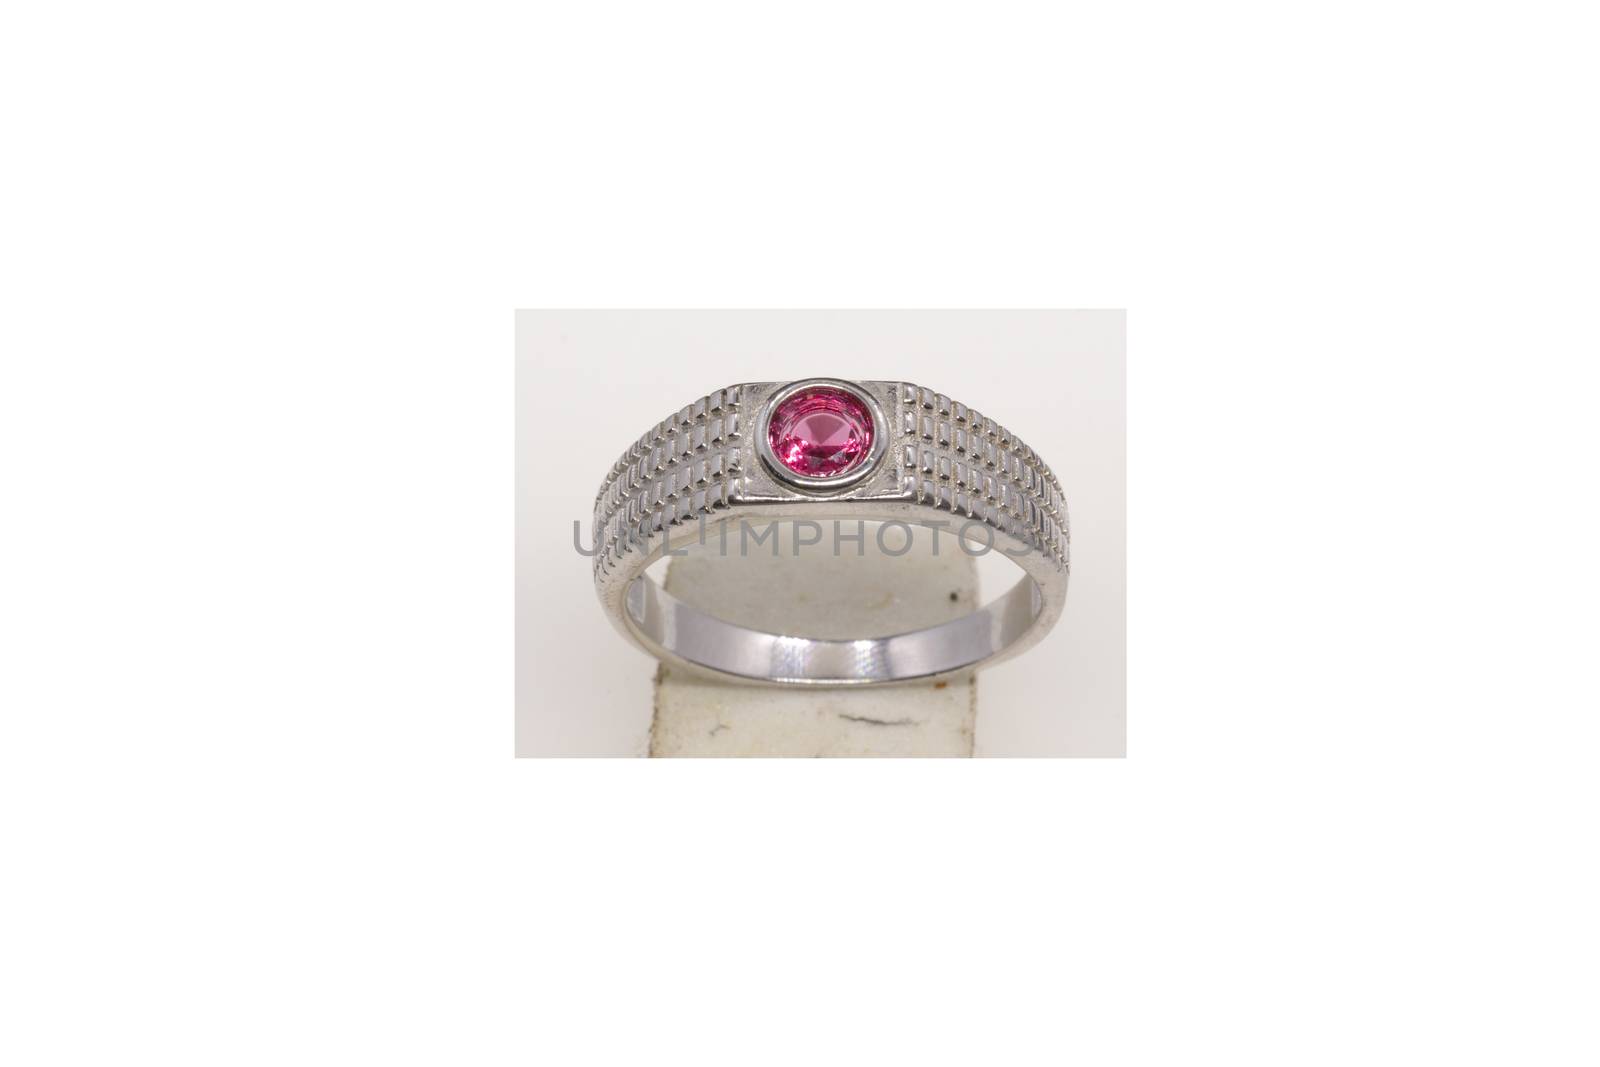 A crystal red Diamond Stone 92.5 Sterling Silver Round Solitaire Ring design for Women and Girls by 9500102400